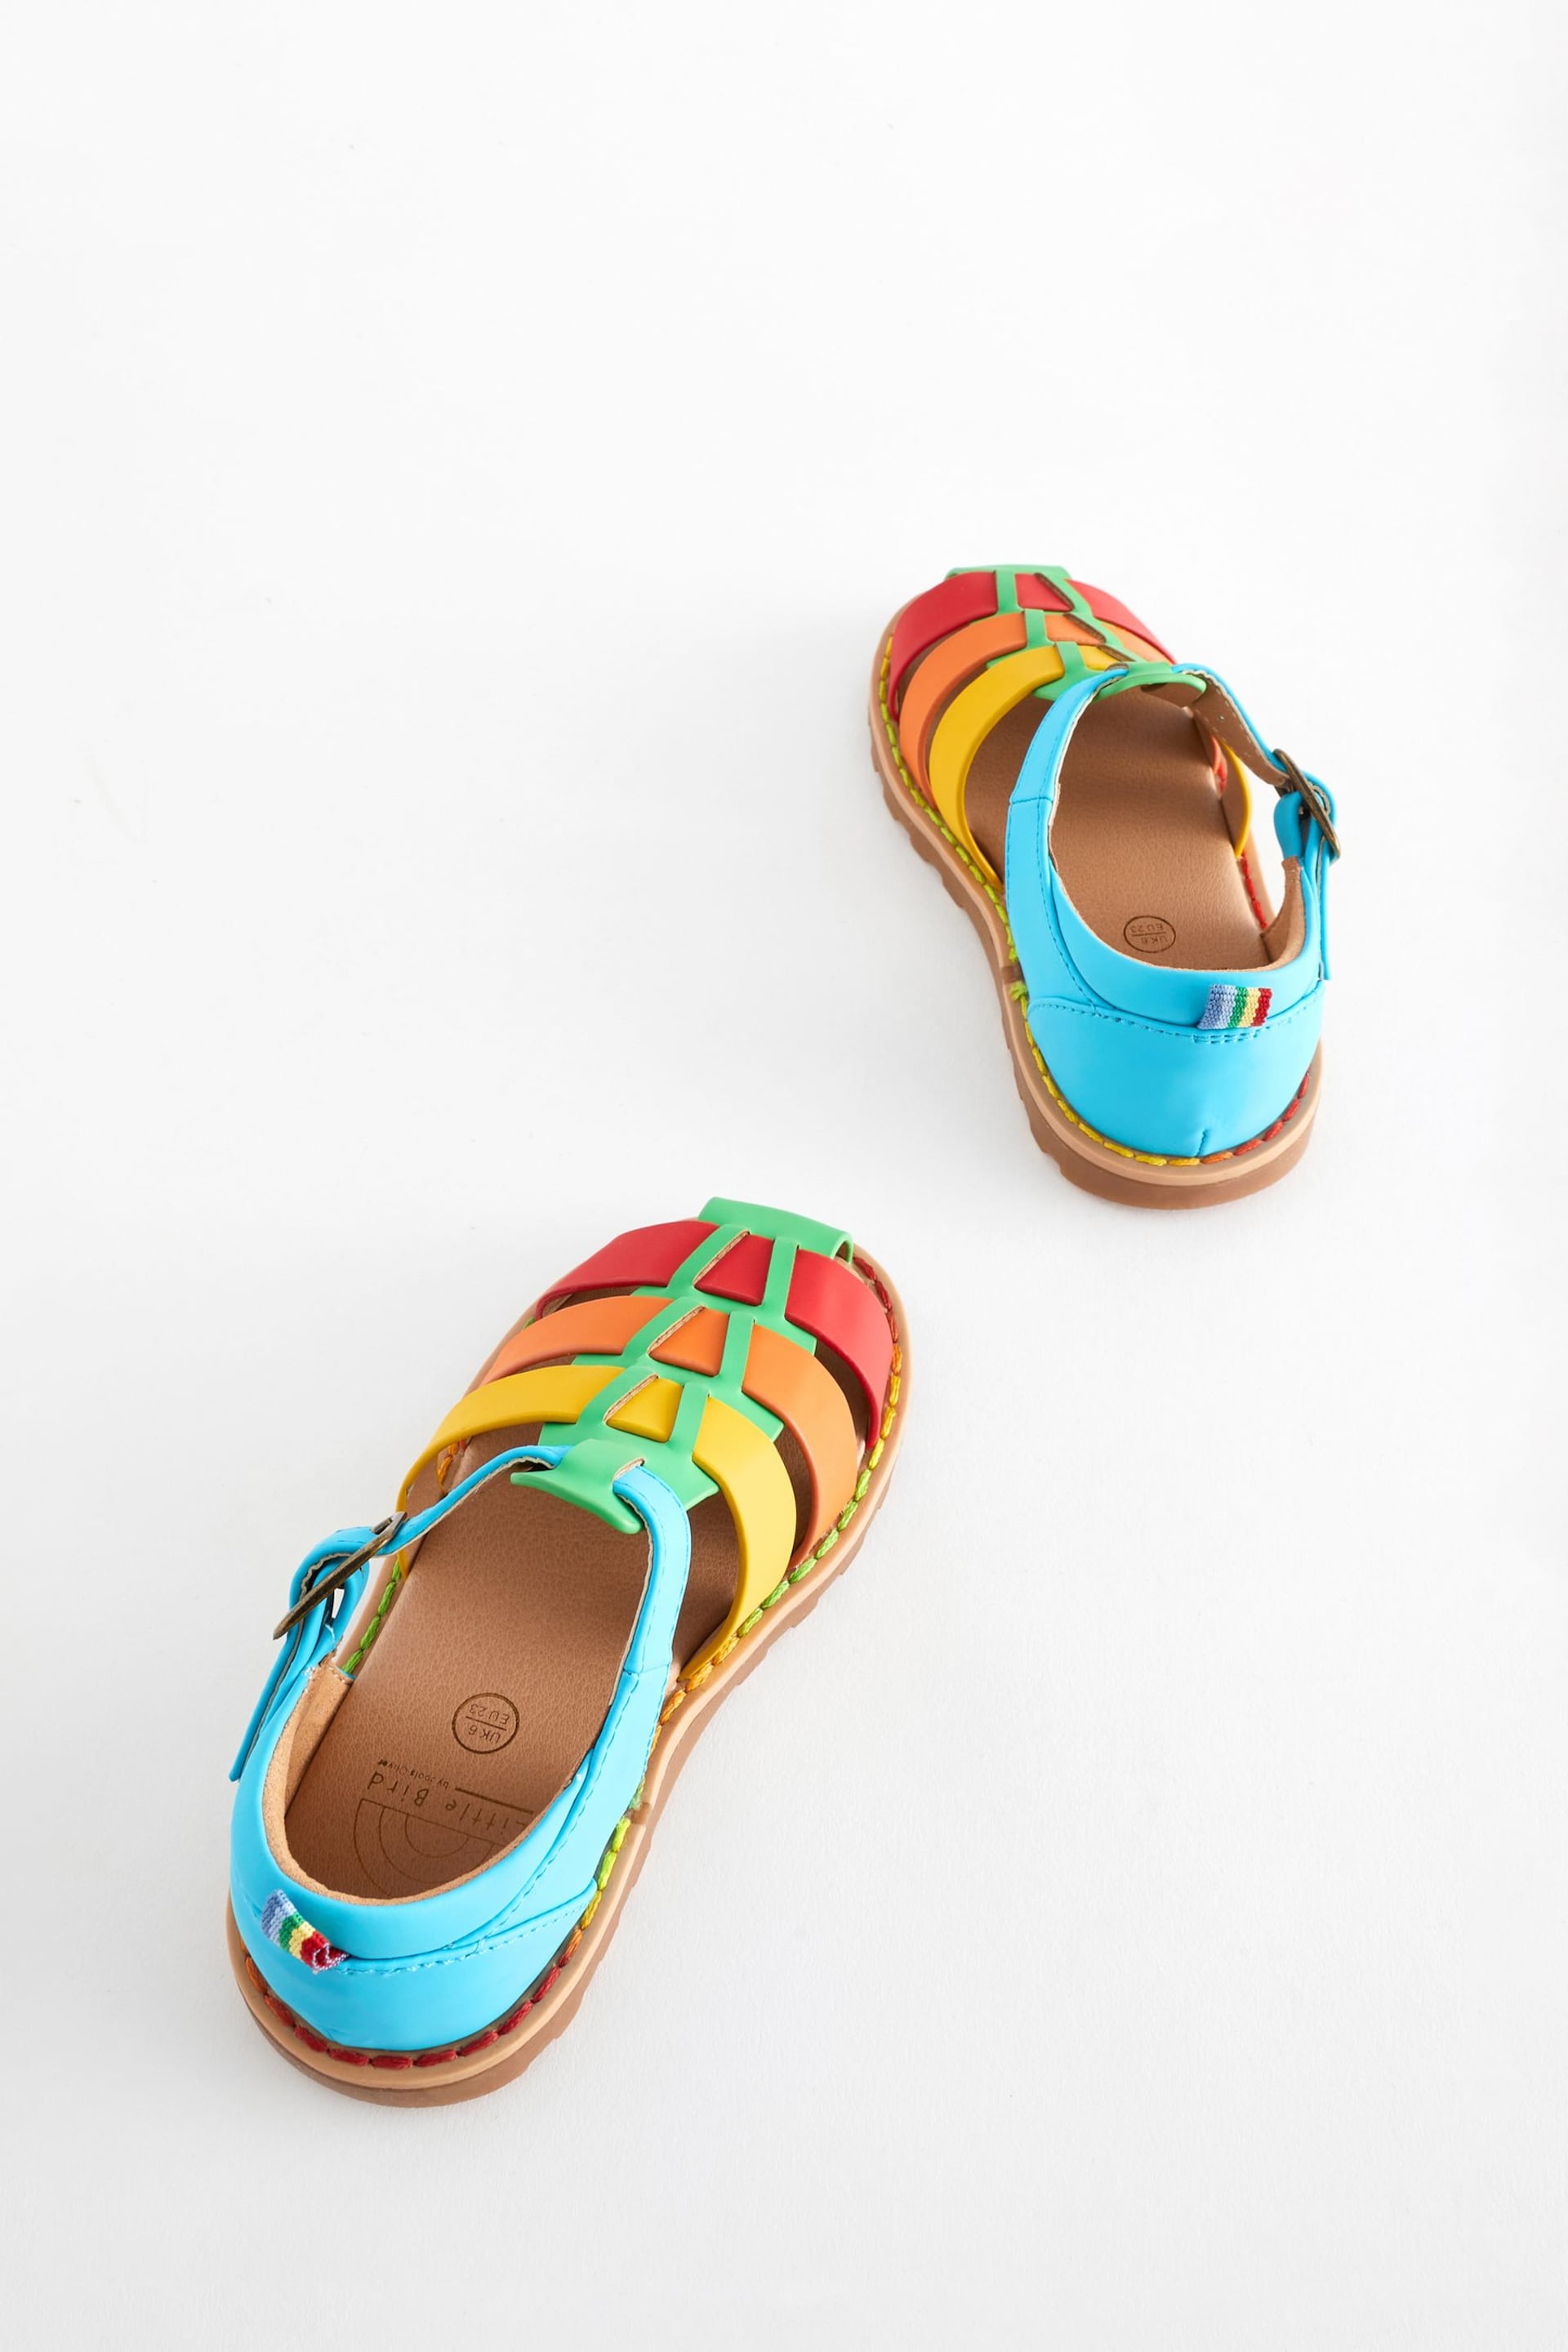 Little Bird by Jools Oliver Blue Fisherman Sandals - Image 6 of 6